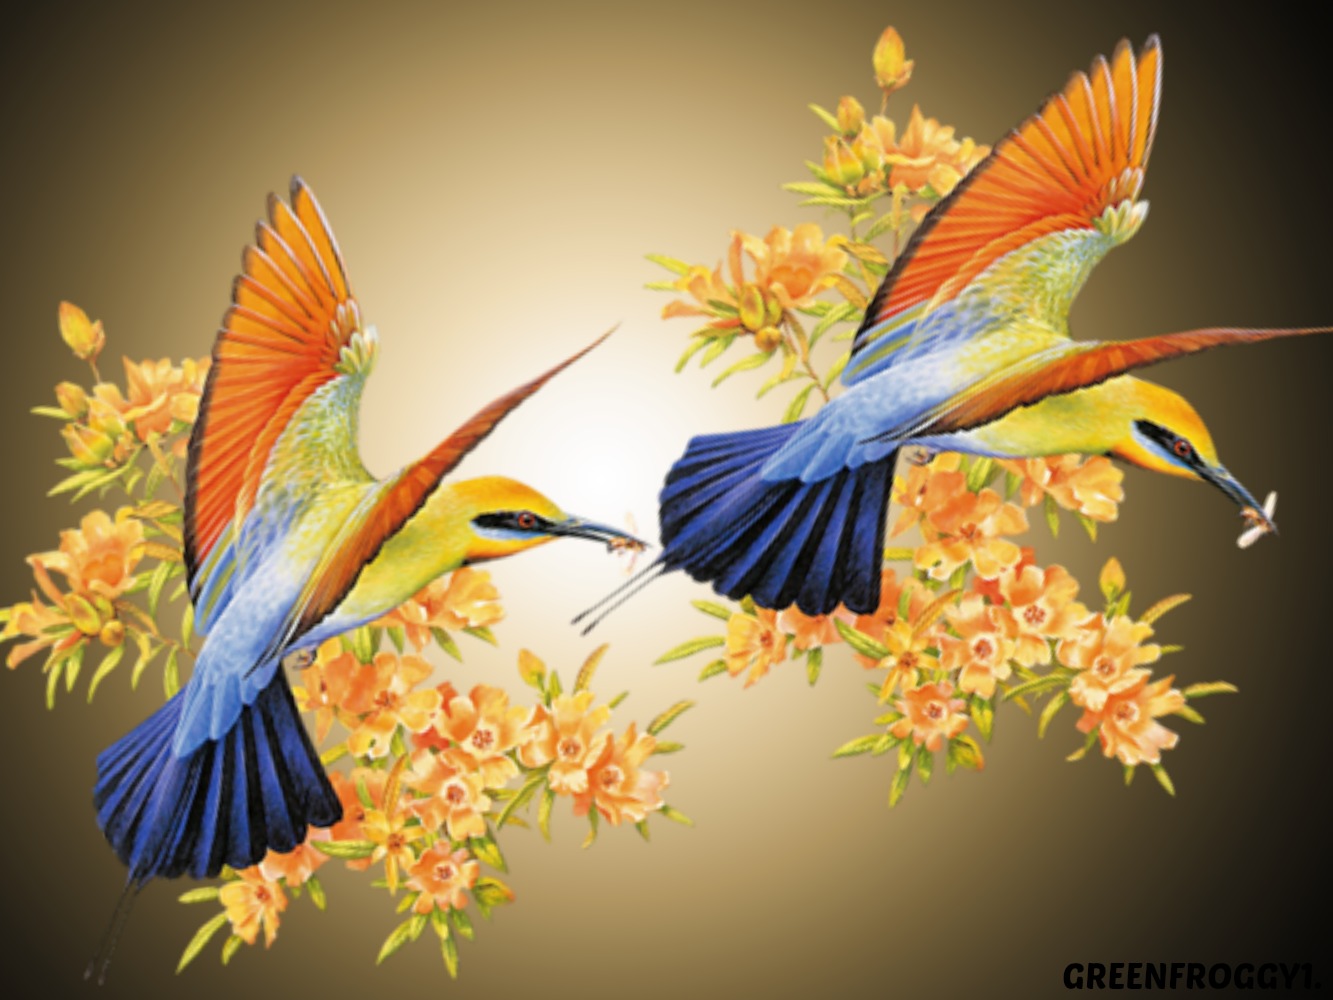 BEE EATERS by GREENFROGGY1